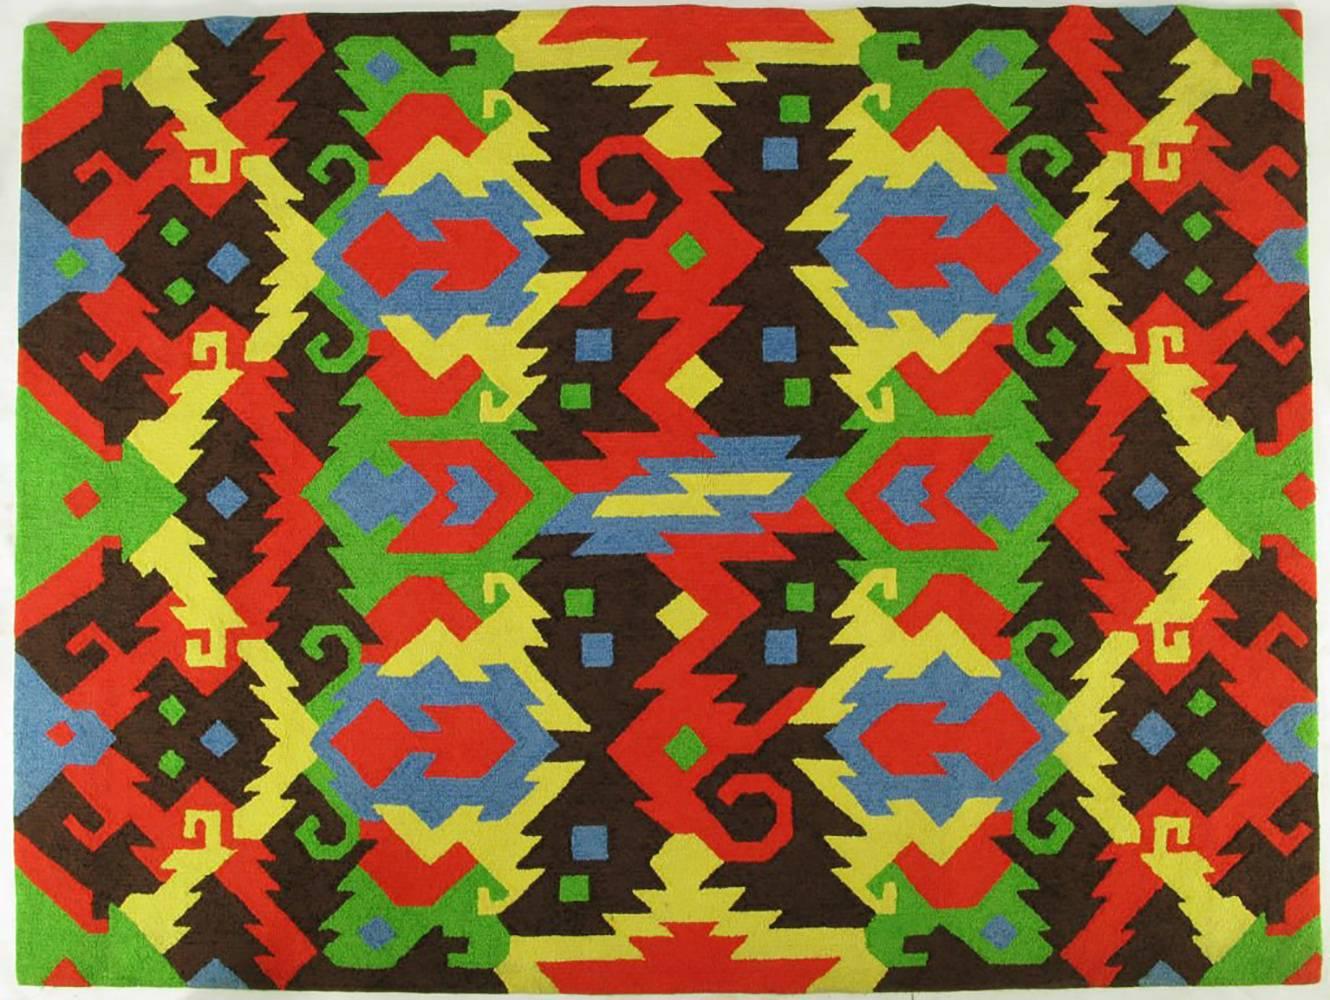 Chocolate brown, saffron yellow, sky blue, grass green, and Chinese red, combined in a Mayan-inspired abstract pattern, are the outstanding features of this 6' x 8' wool rug by custom rug maker Edward Fields.
Pair available for 9500.00
Acquired